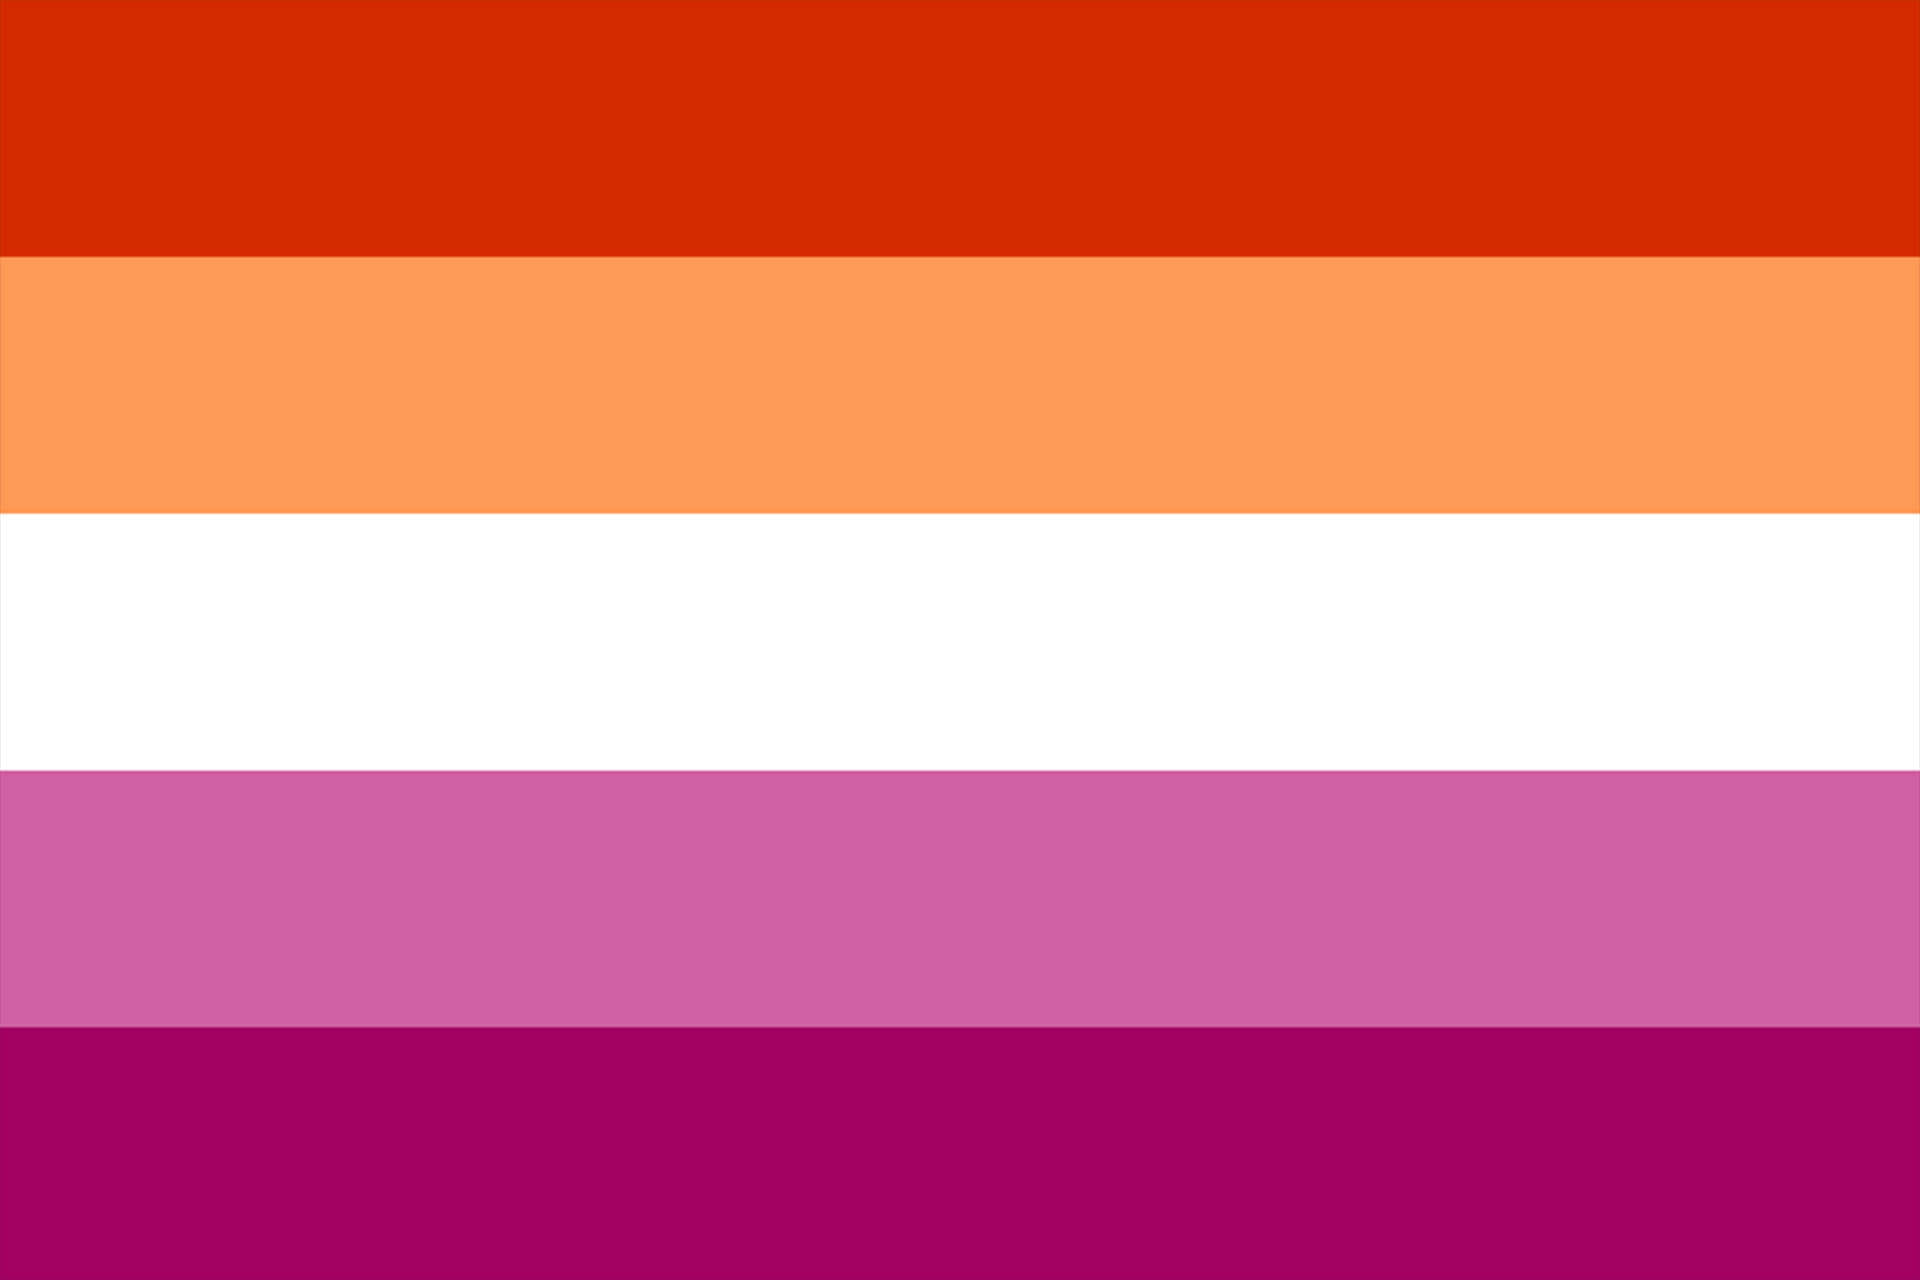 A Rainbow Flag With A White, Pink, And Orange Color